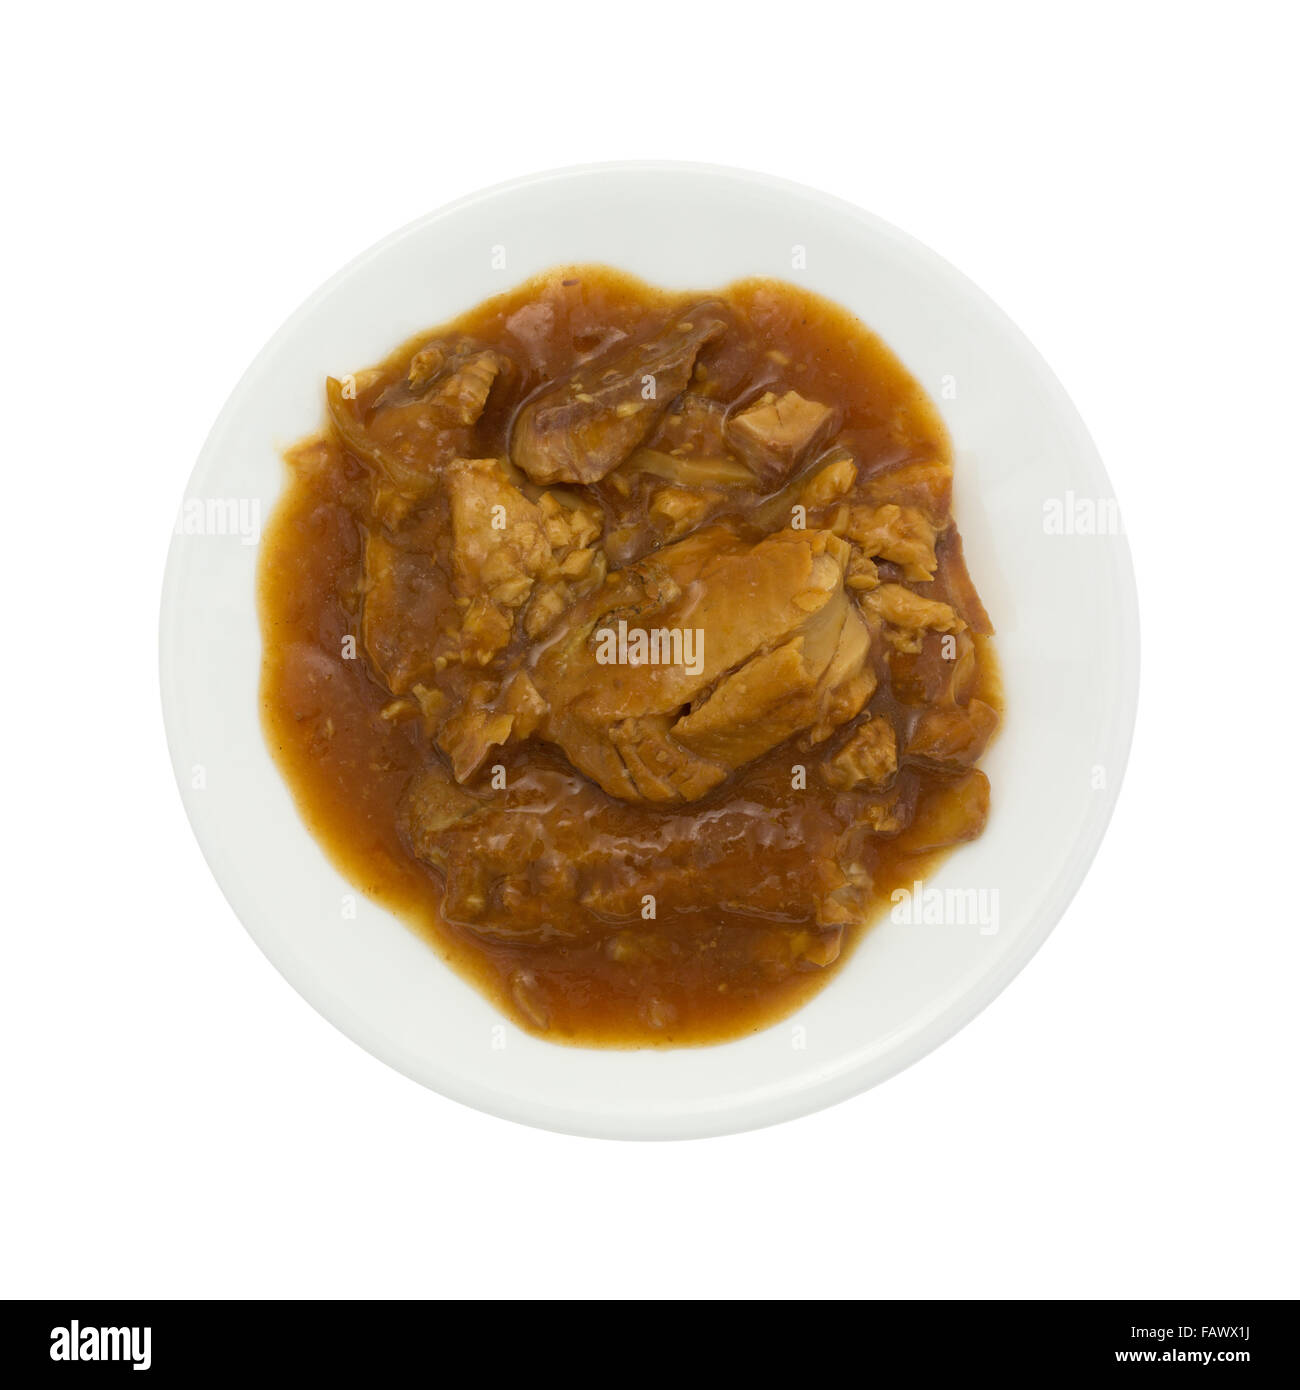 Top view of tilapia fillets in a thick teriyaki sauce on a plate isolated on a white background. Stock Photo